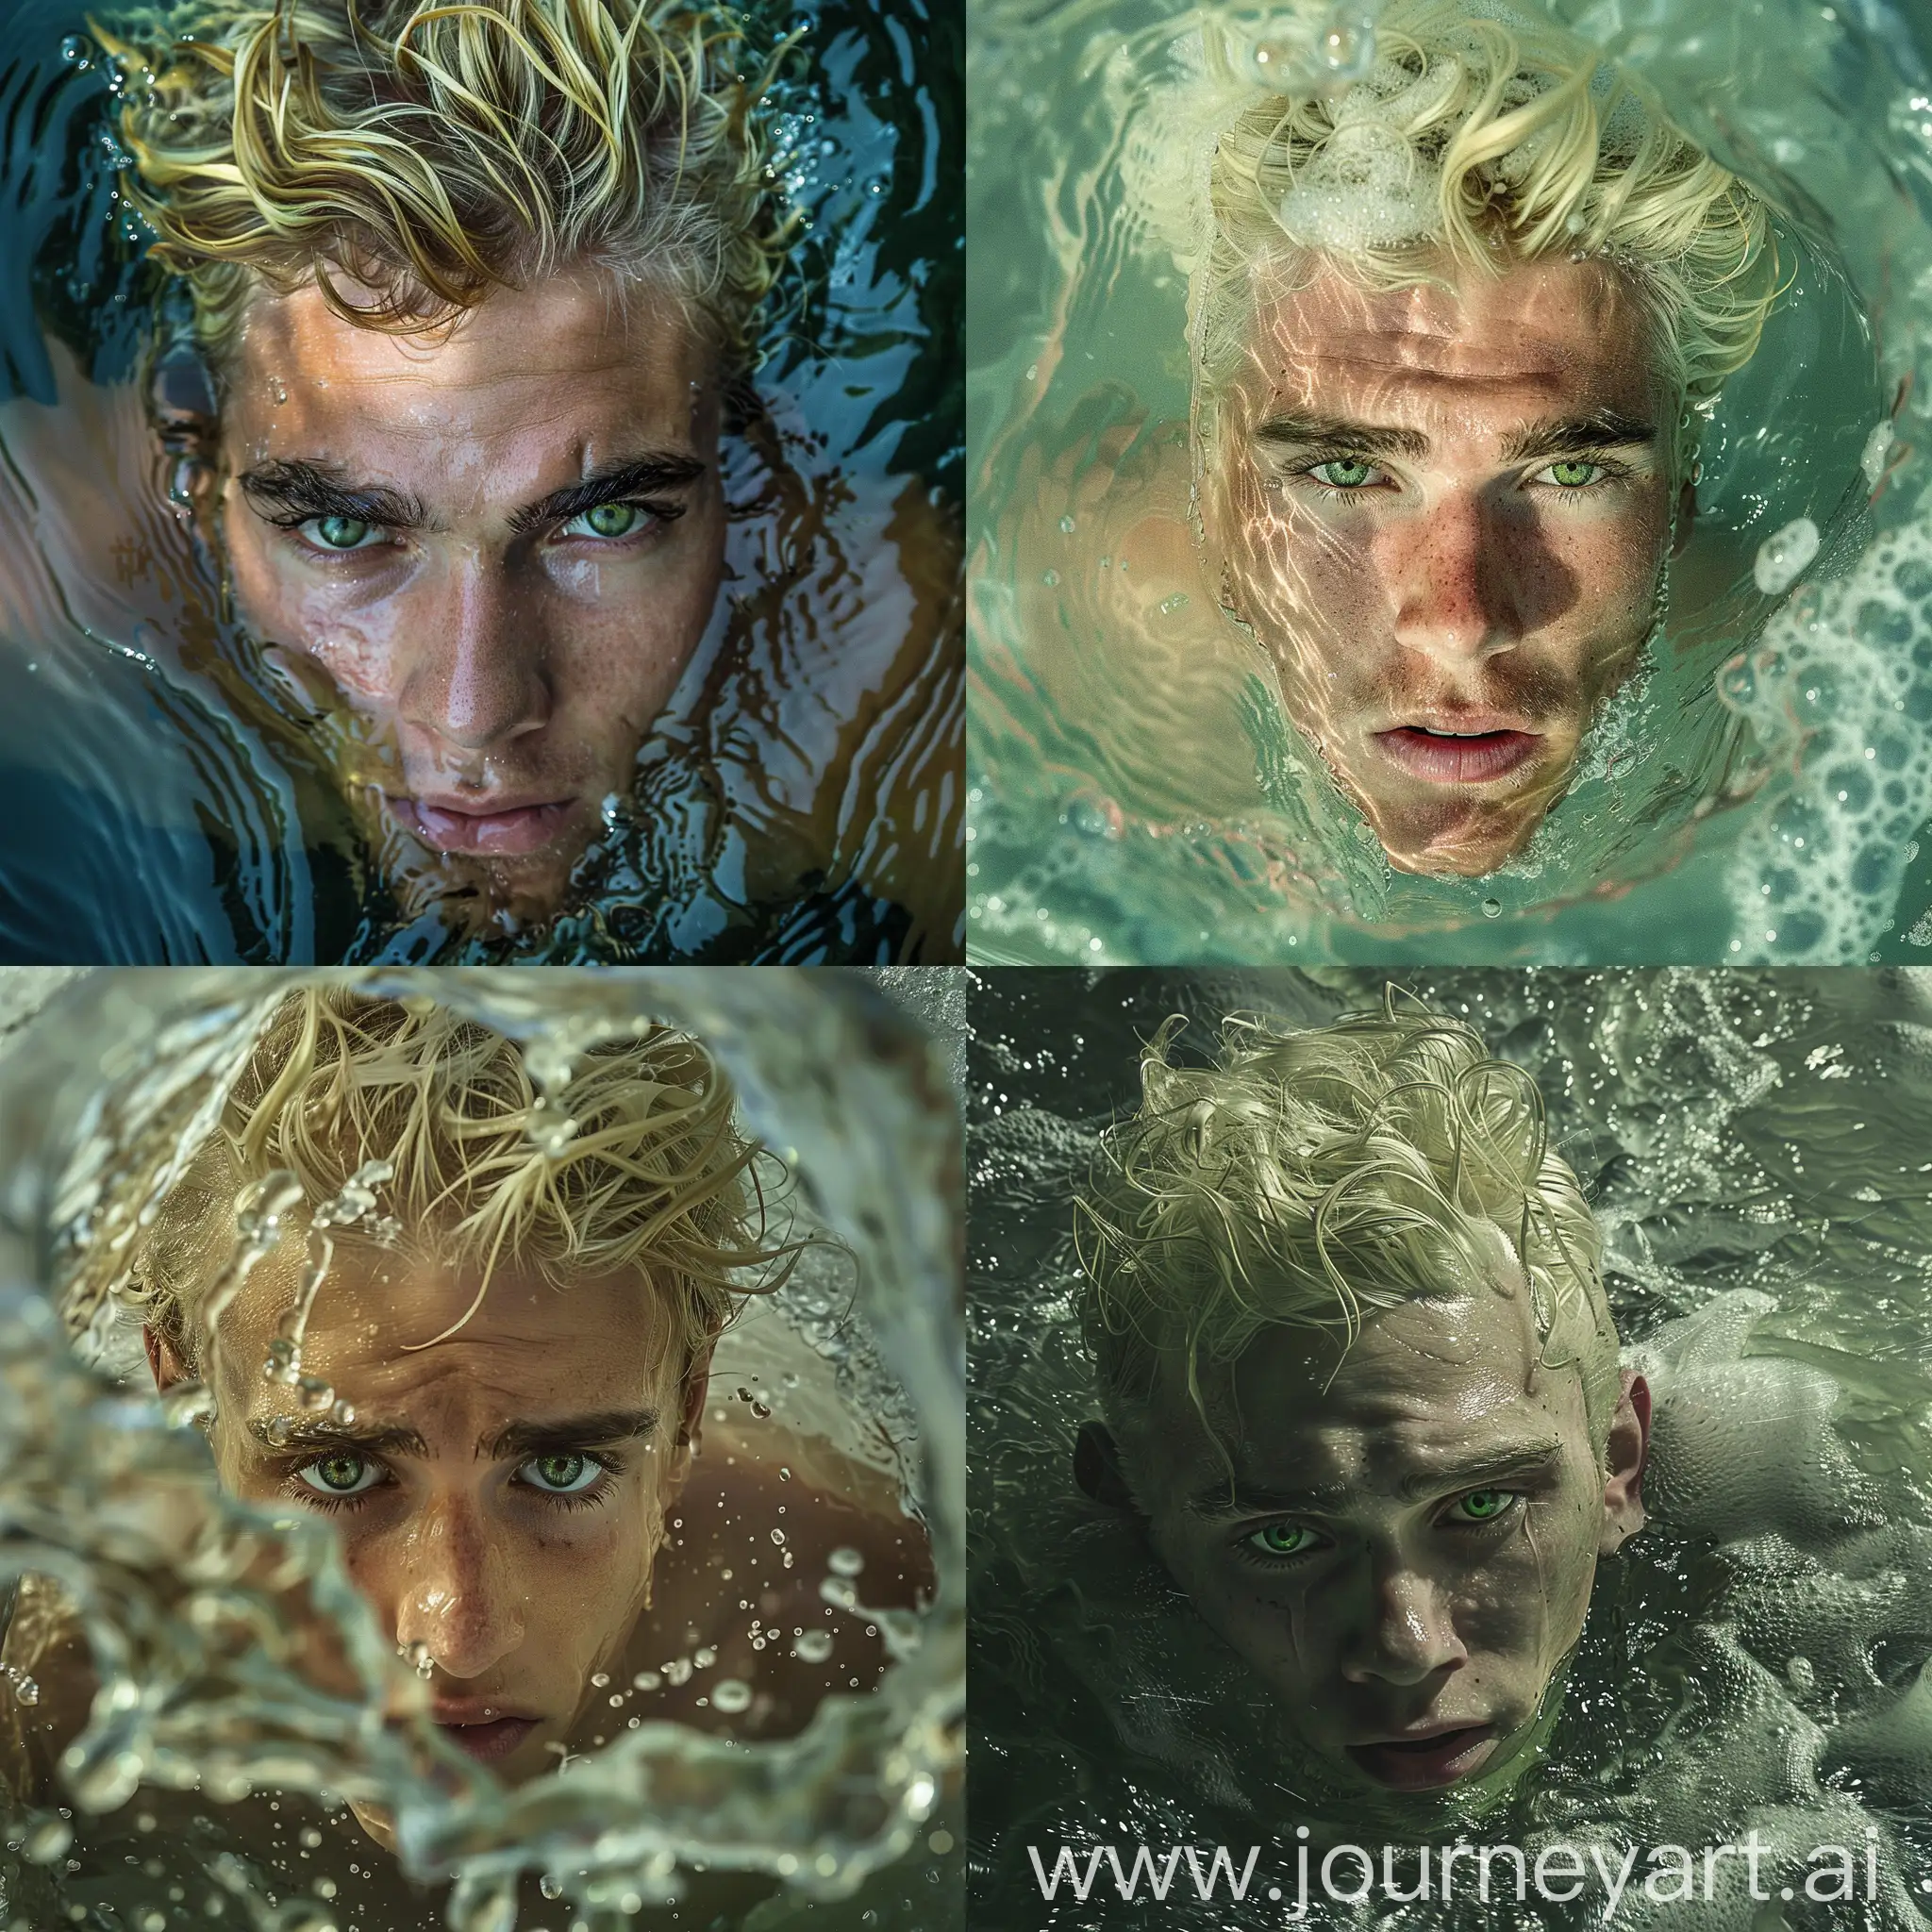 Blond-Man-with-Green-Eyes-Falling-into-Tuman-River